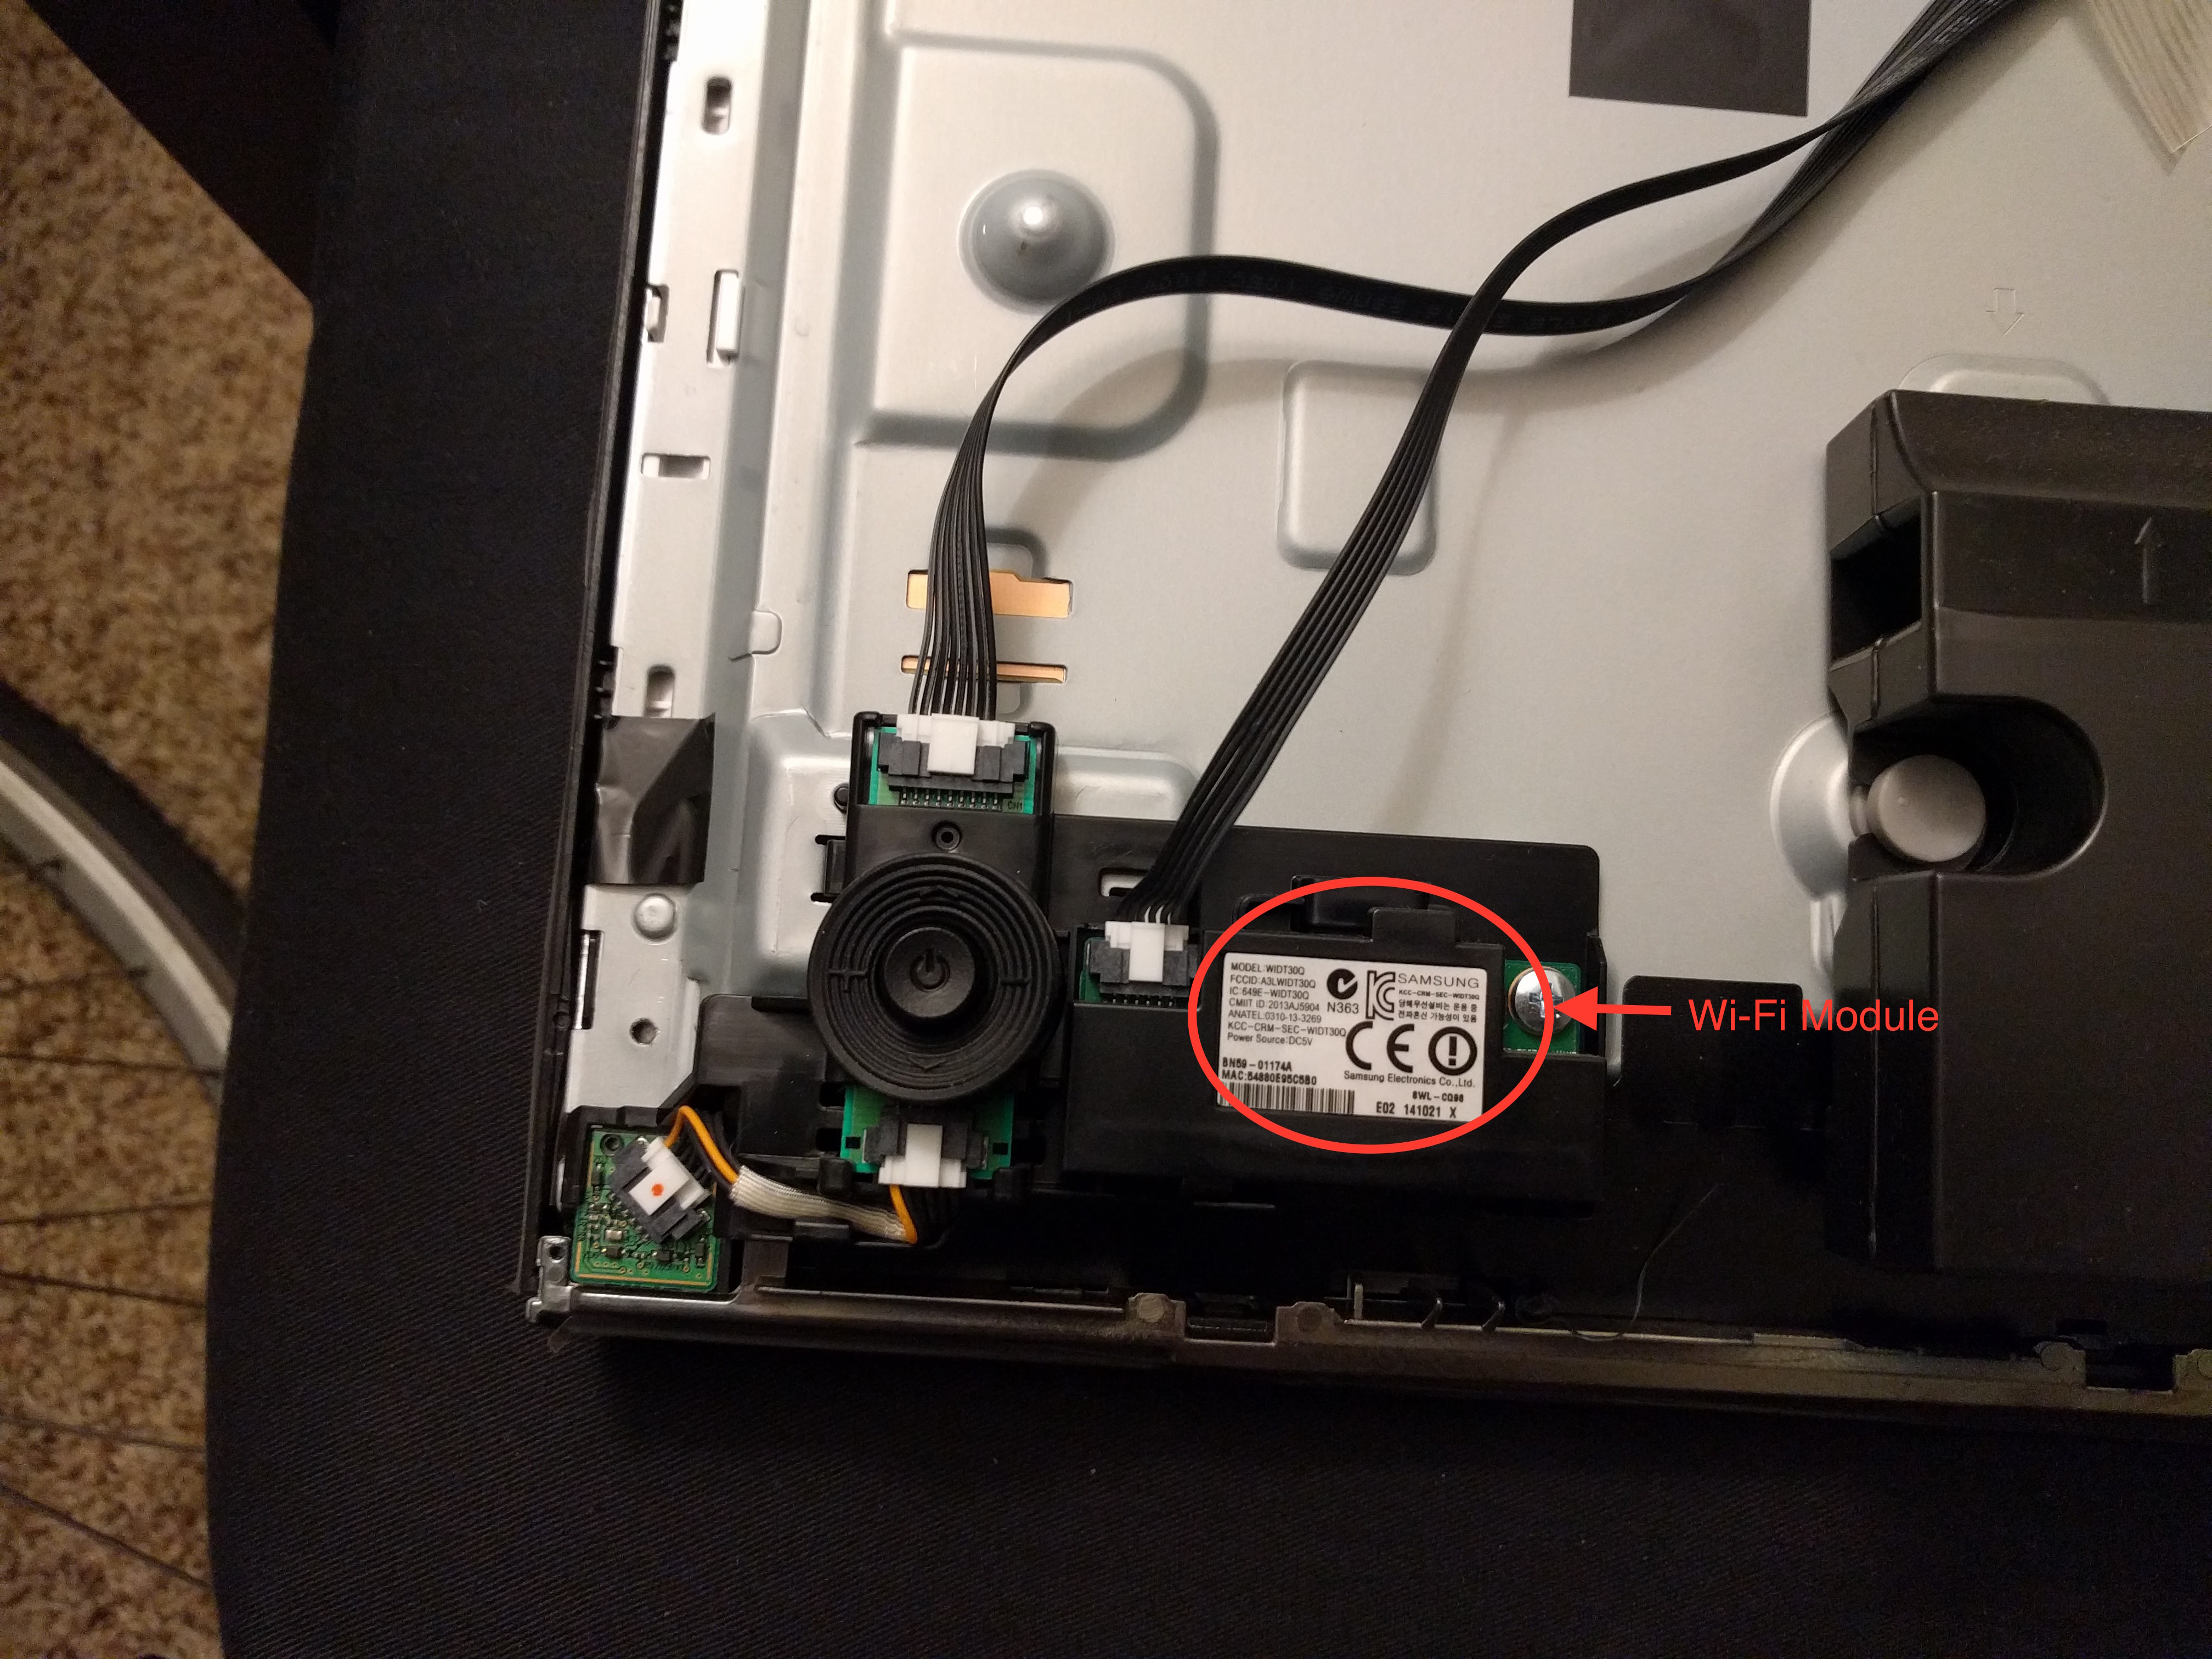 How to replace a faulty wifi card in a Samsung Smart TV 